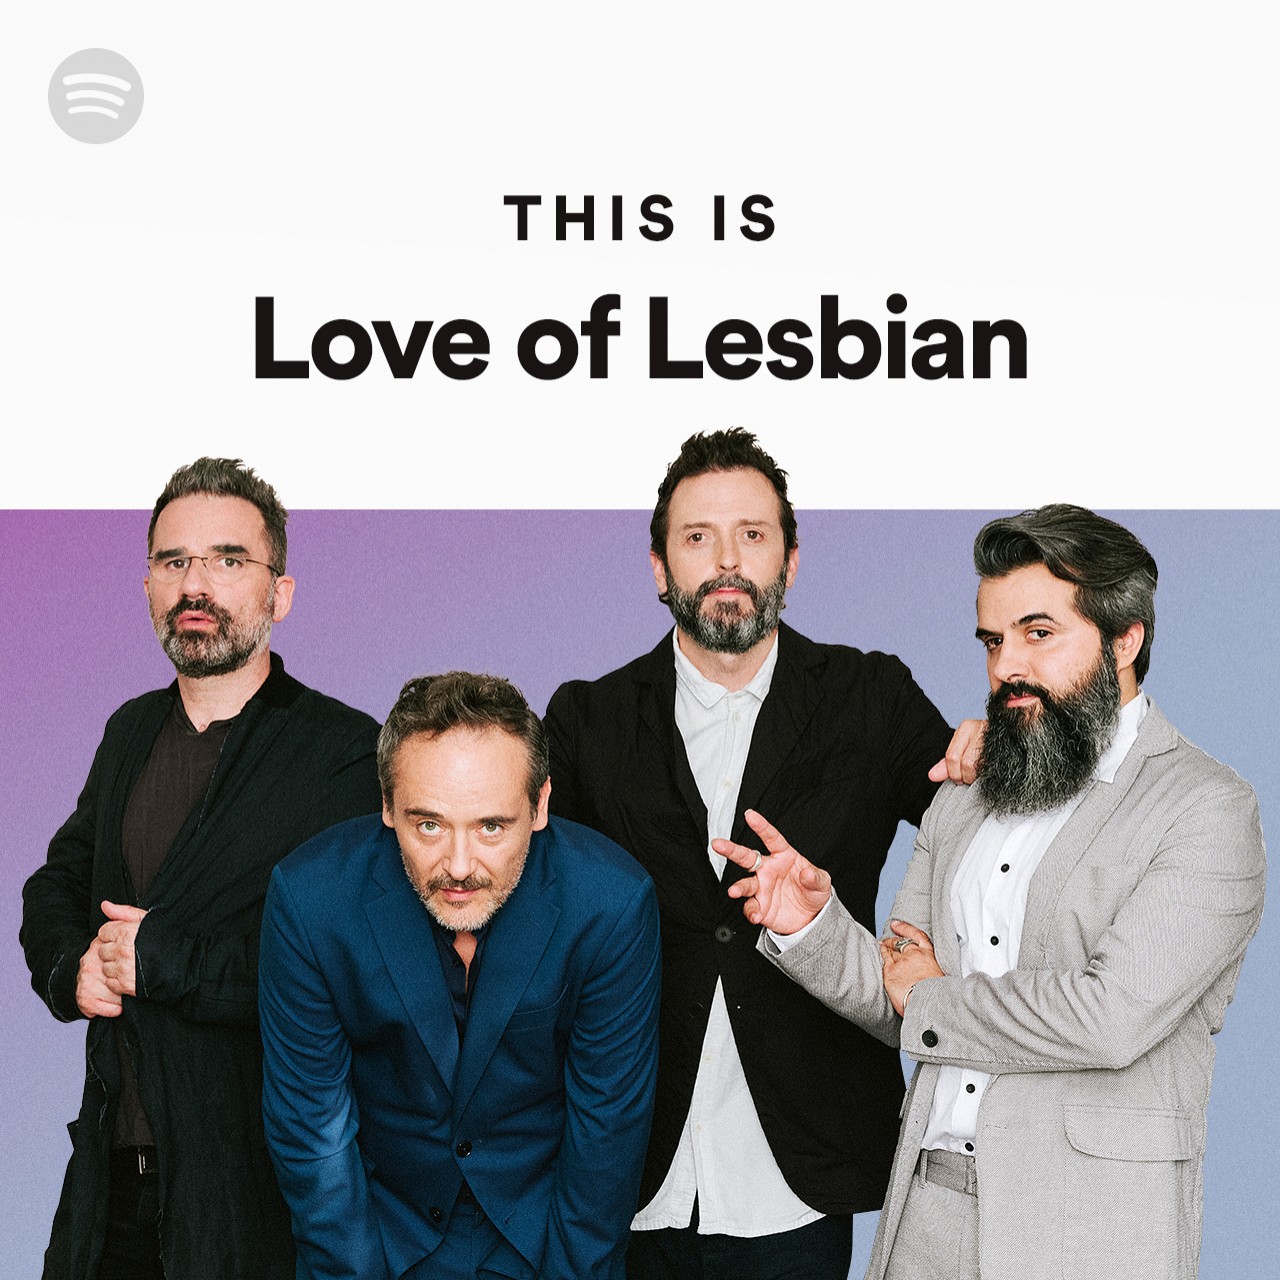 This Is Love of Lesbian